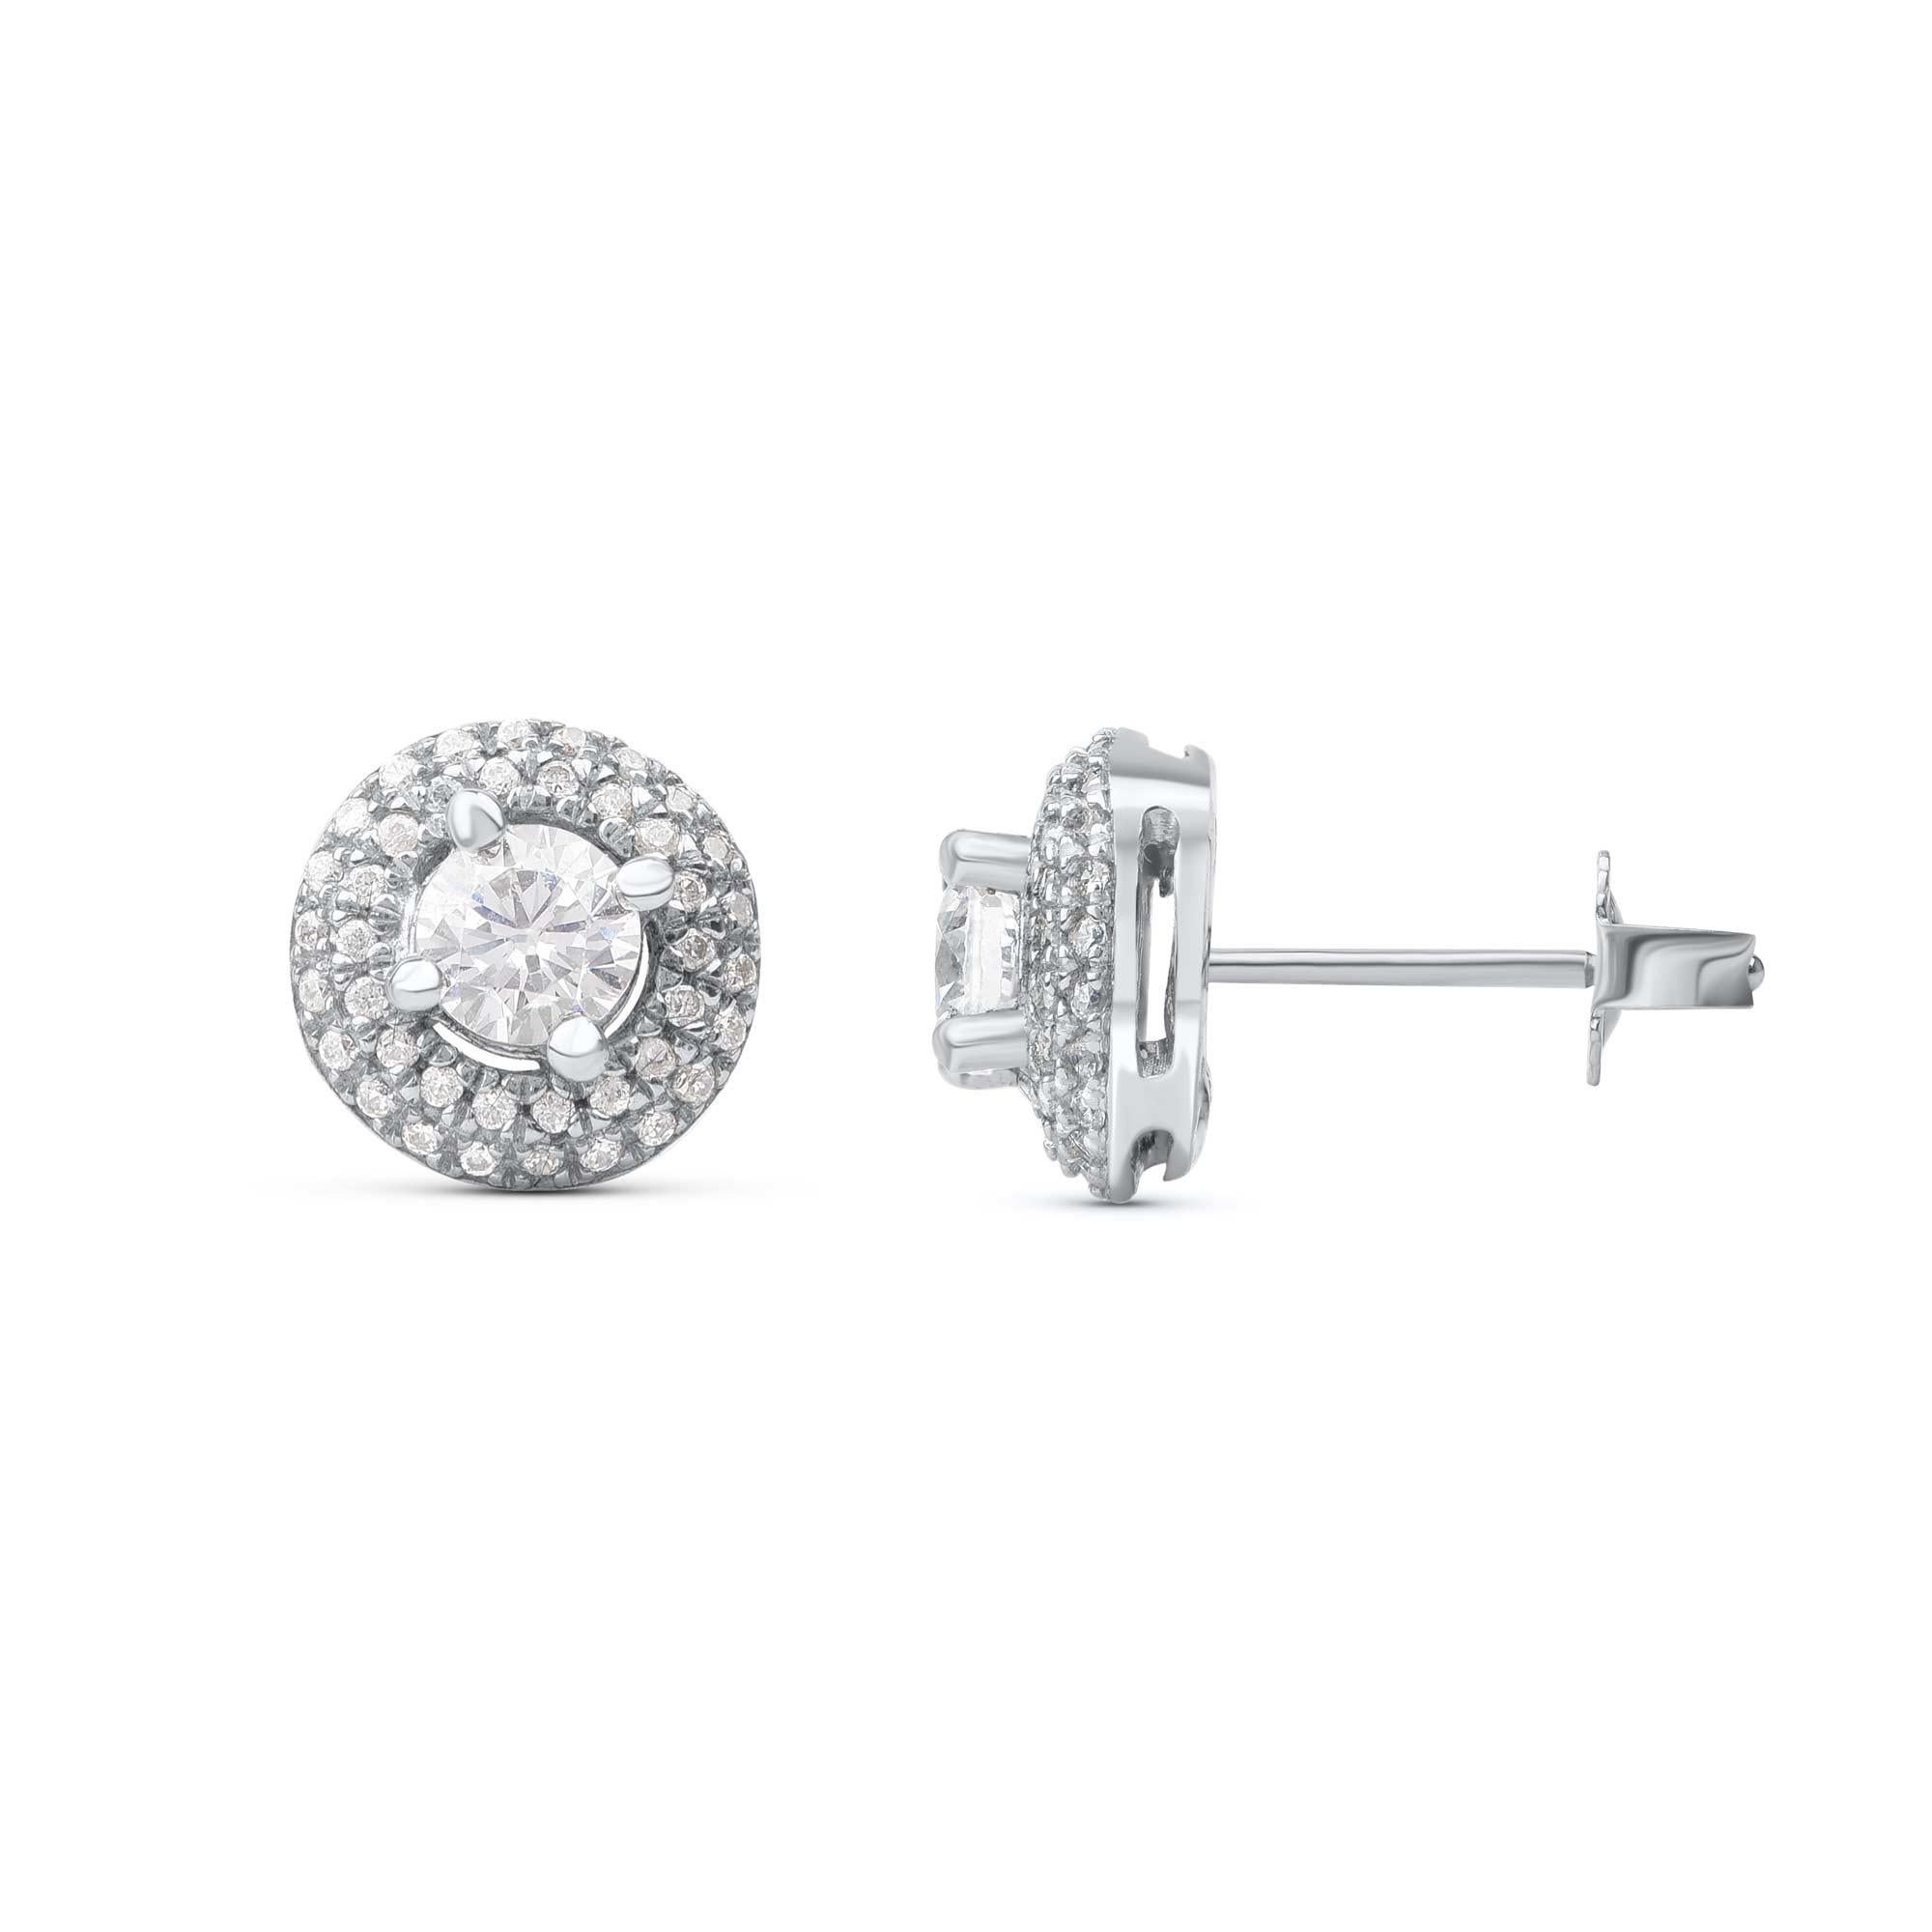 Embedded with 82 brilliant cut diamonds elegantly set in prong and micro-prong setting - crafted by our in-house experts in 18 kt white gold. Diamonds are graded H-I Color, I1 Clarity. Dazzling and dainty, these diamond accented stud earrings are a